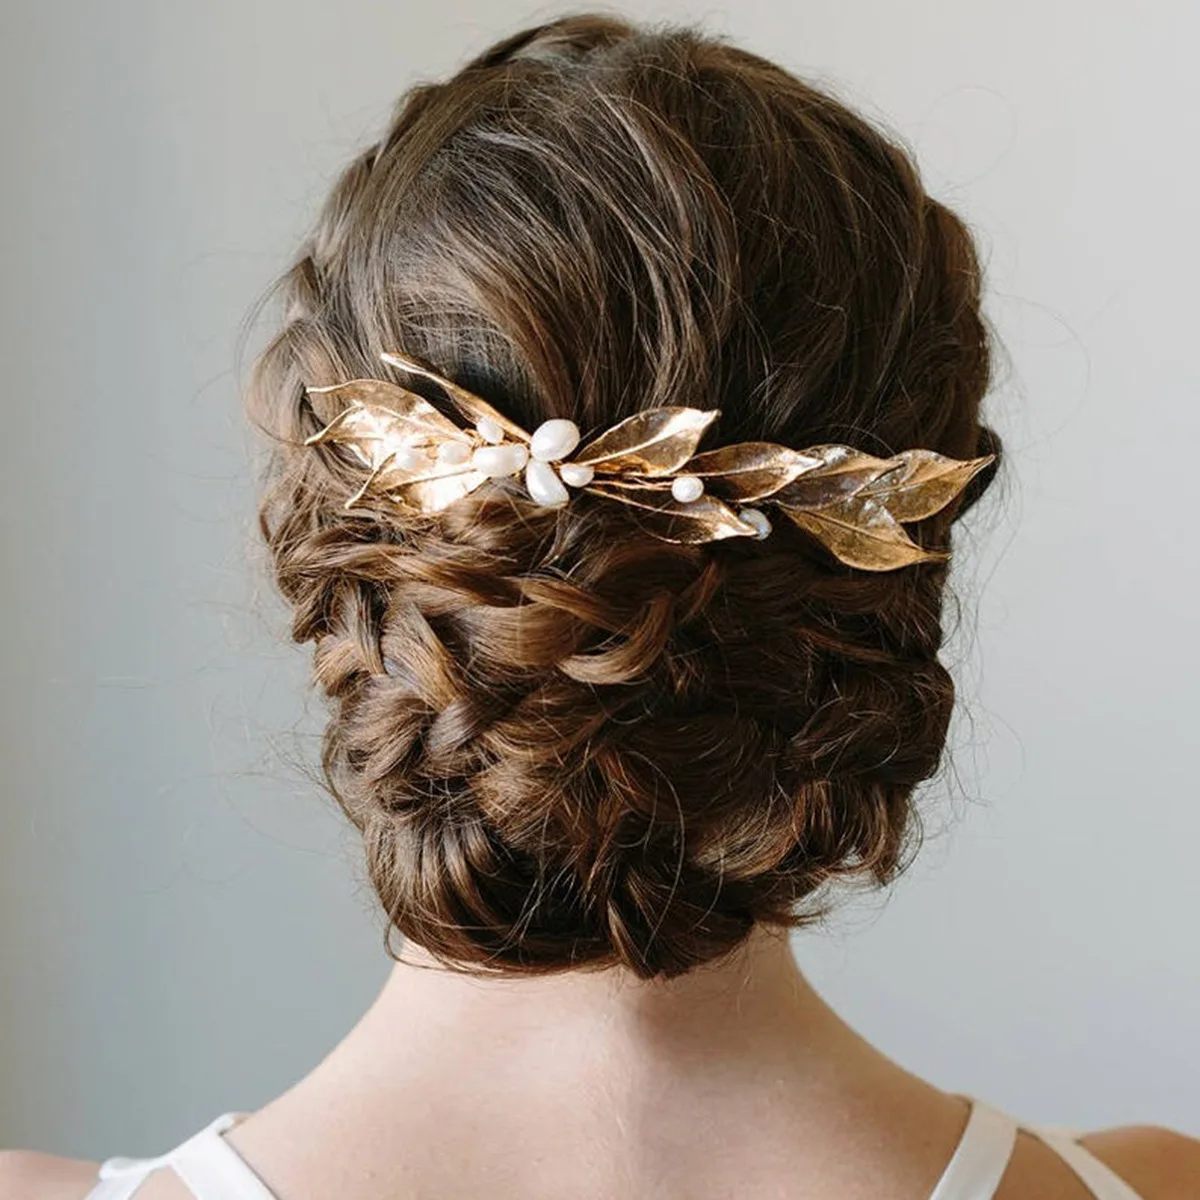 

Brass Tone Hair Side Combs Leaves and Beads Bridal Hair Clips Alloy Metal Hair Accessories for Bride Wedding NOV99